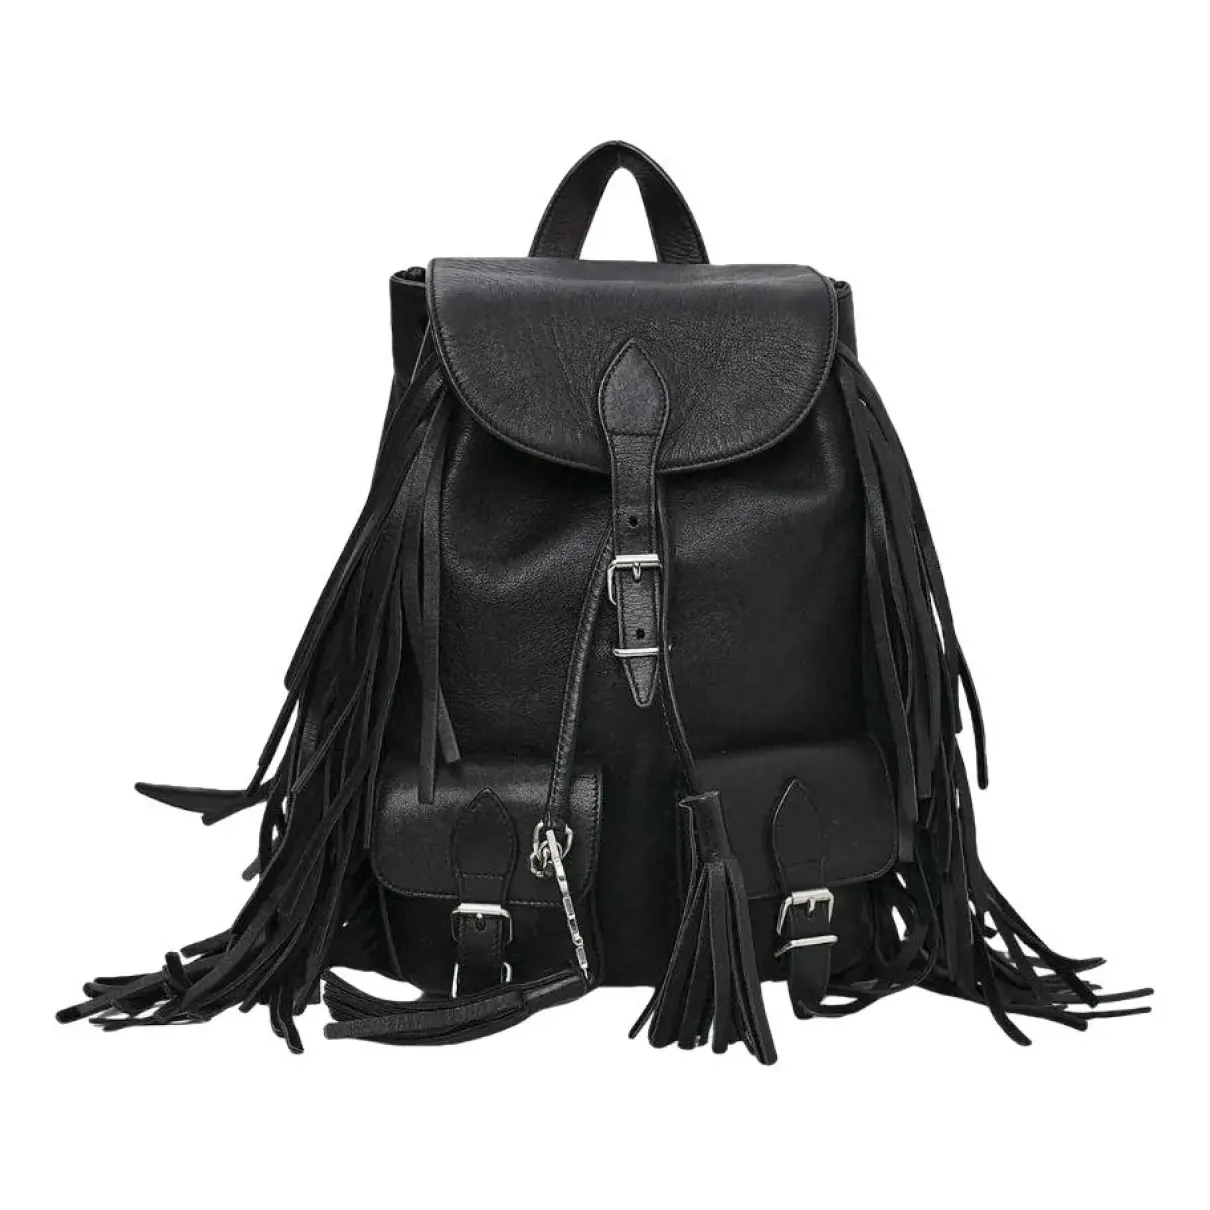 Festival leather backpack